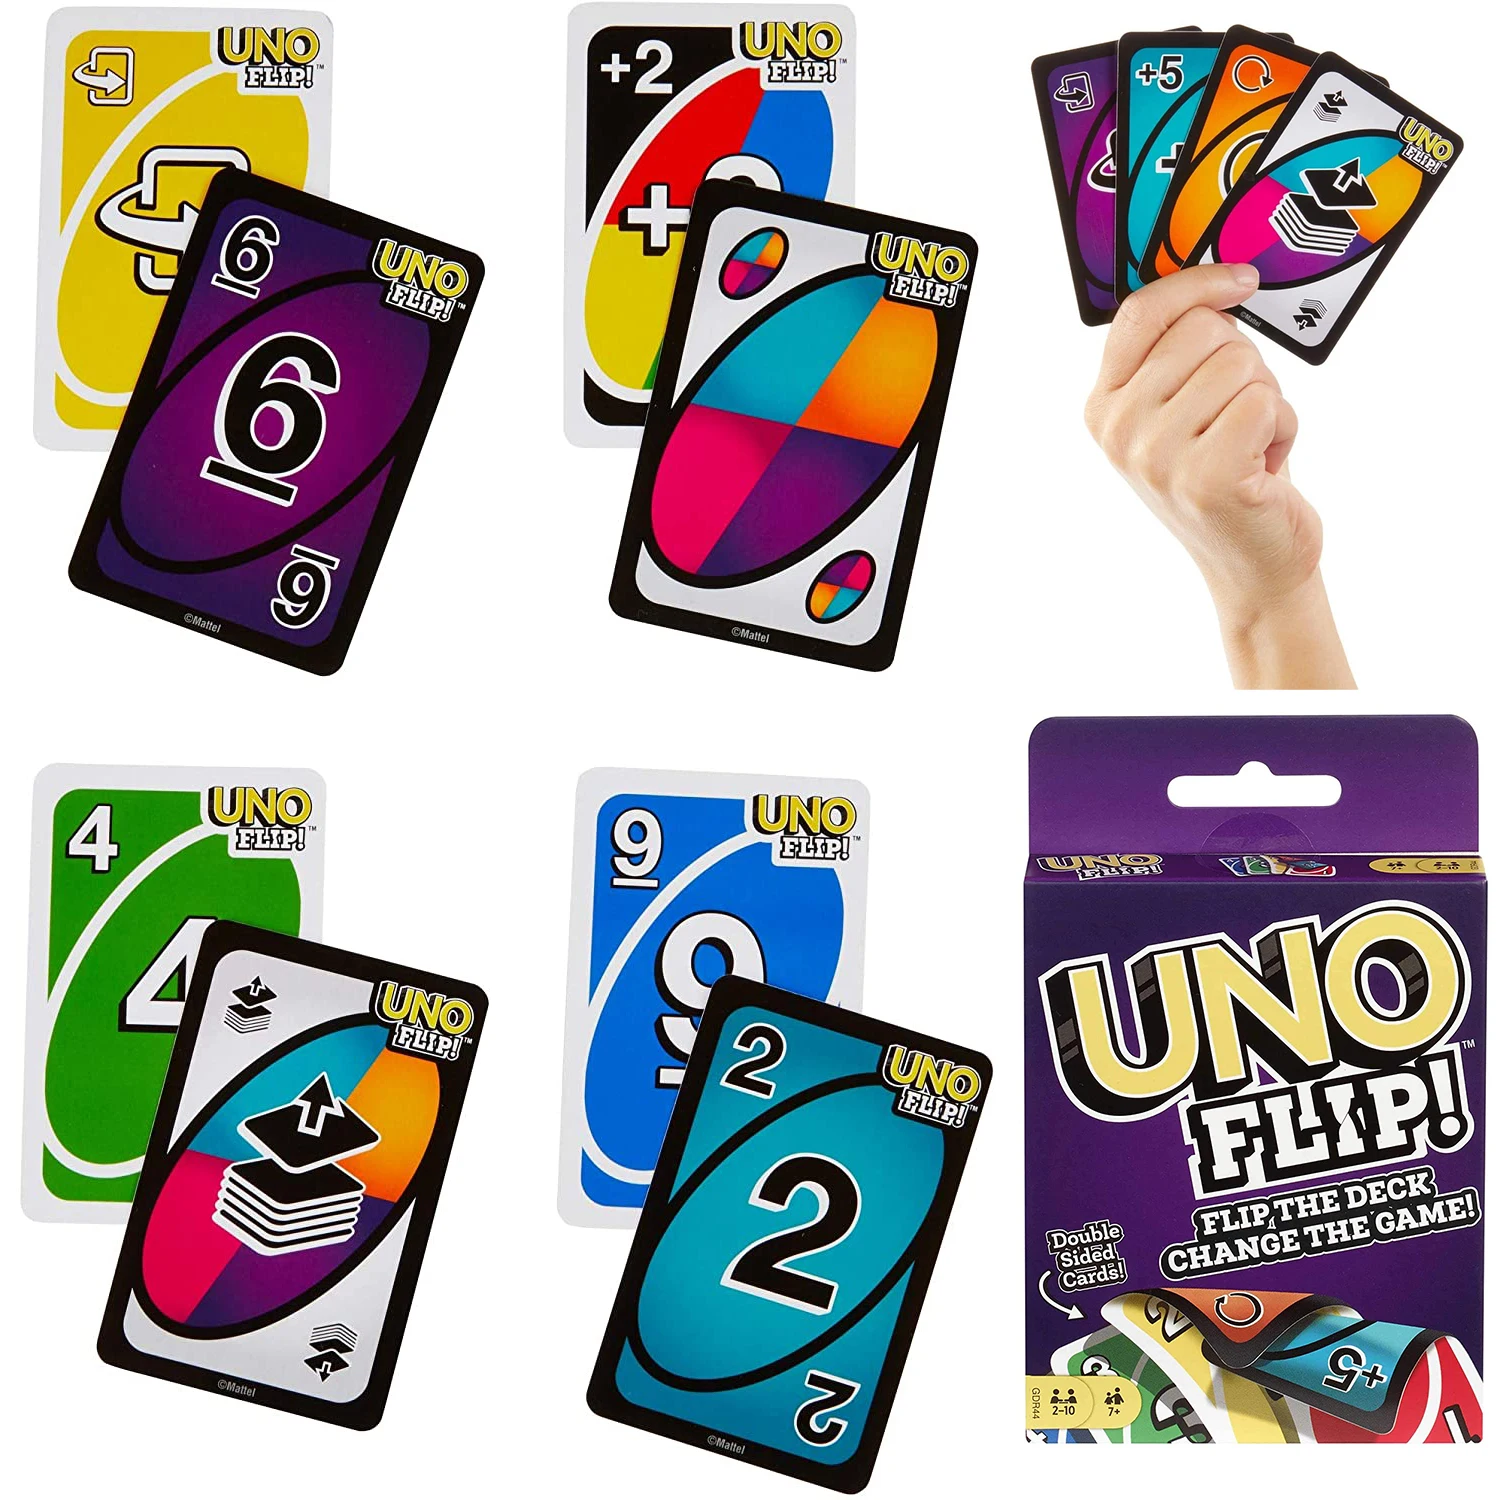 

UNO-FLIP Card Game Mattel Games Genuine Family Funny Entertainment Board Game Fun Poker Playing Toy Gift Box Uno Card